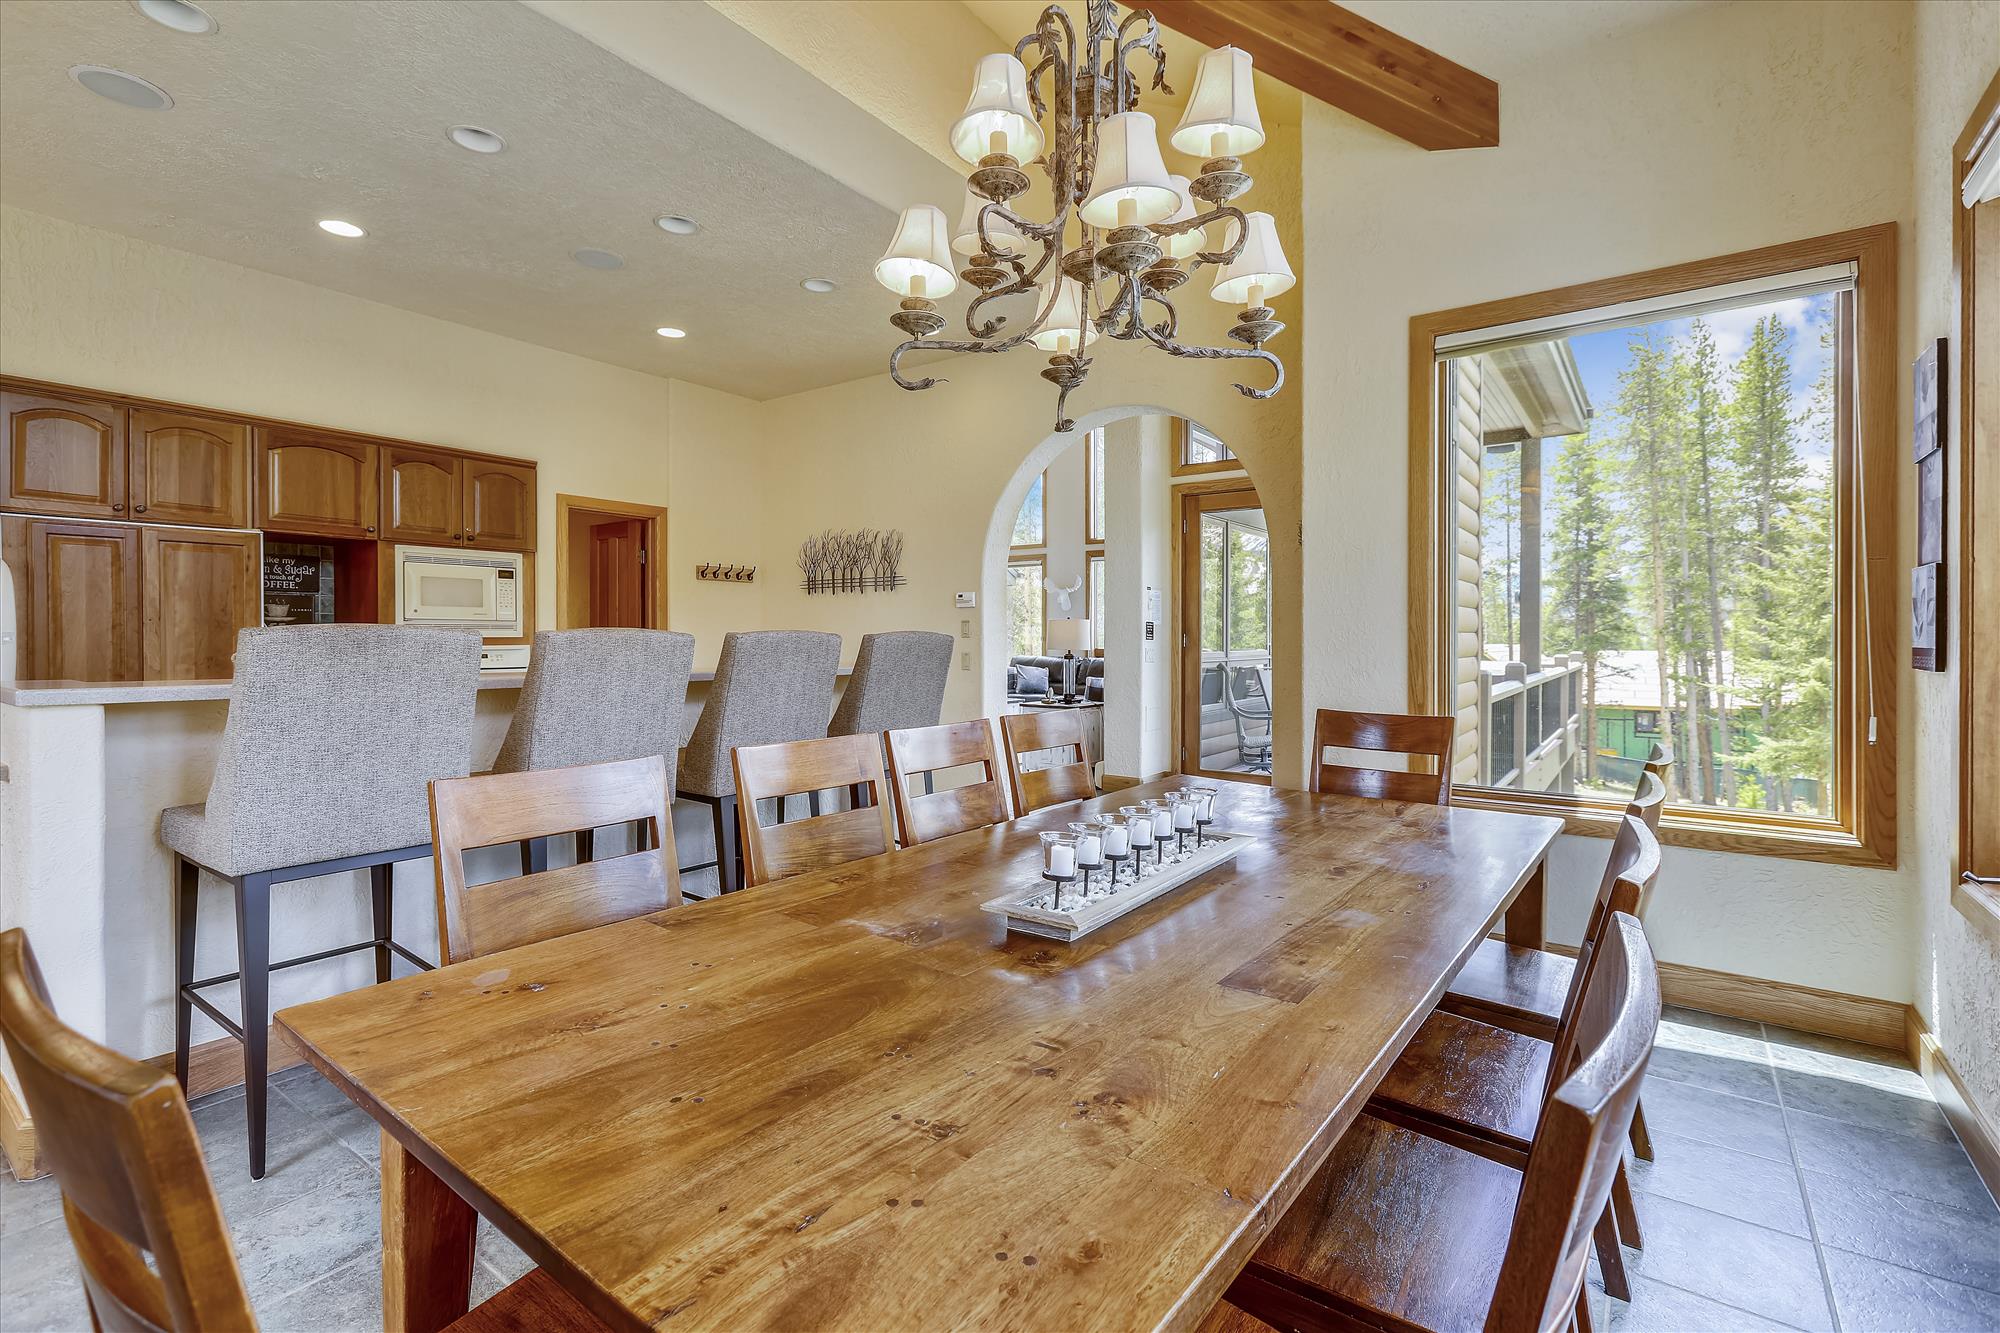 Dining room with 10 seating spaces and 4 additional spaces at the island bar - Evergreen Lodge Breckenridge Vacation Rental